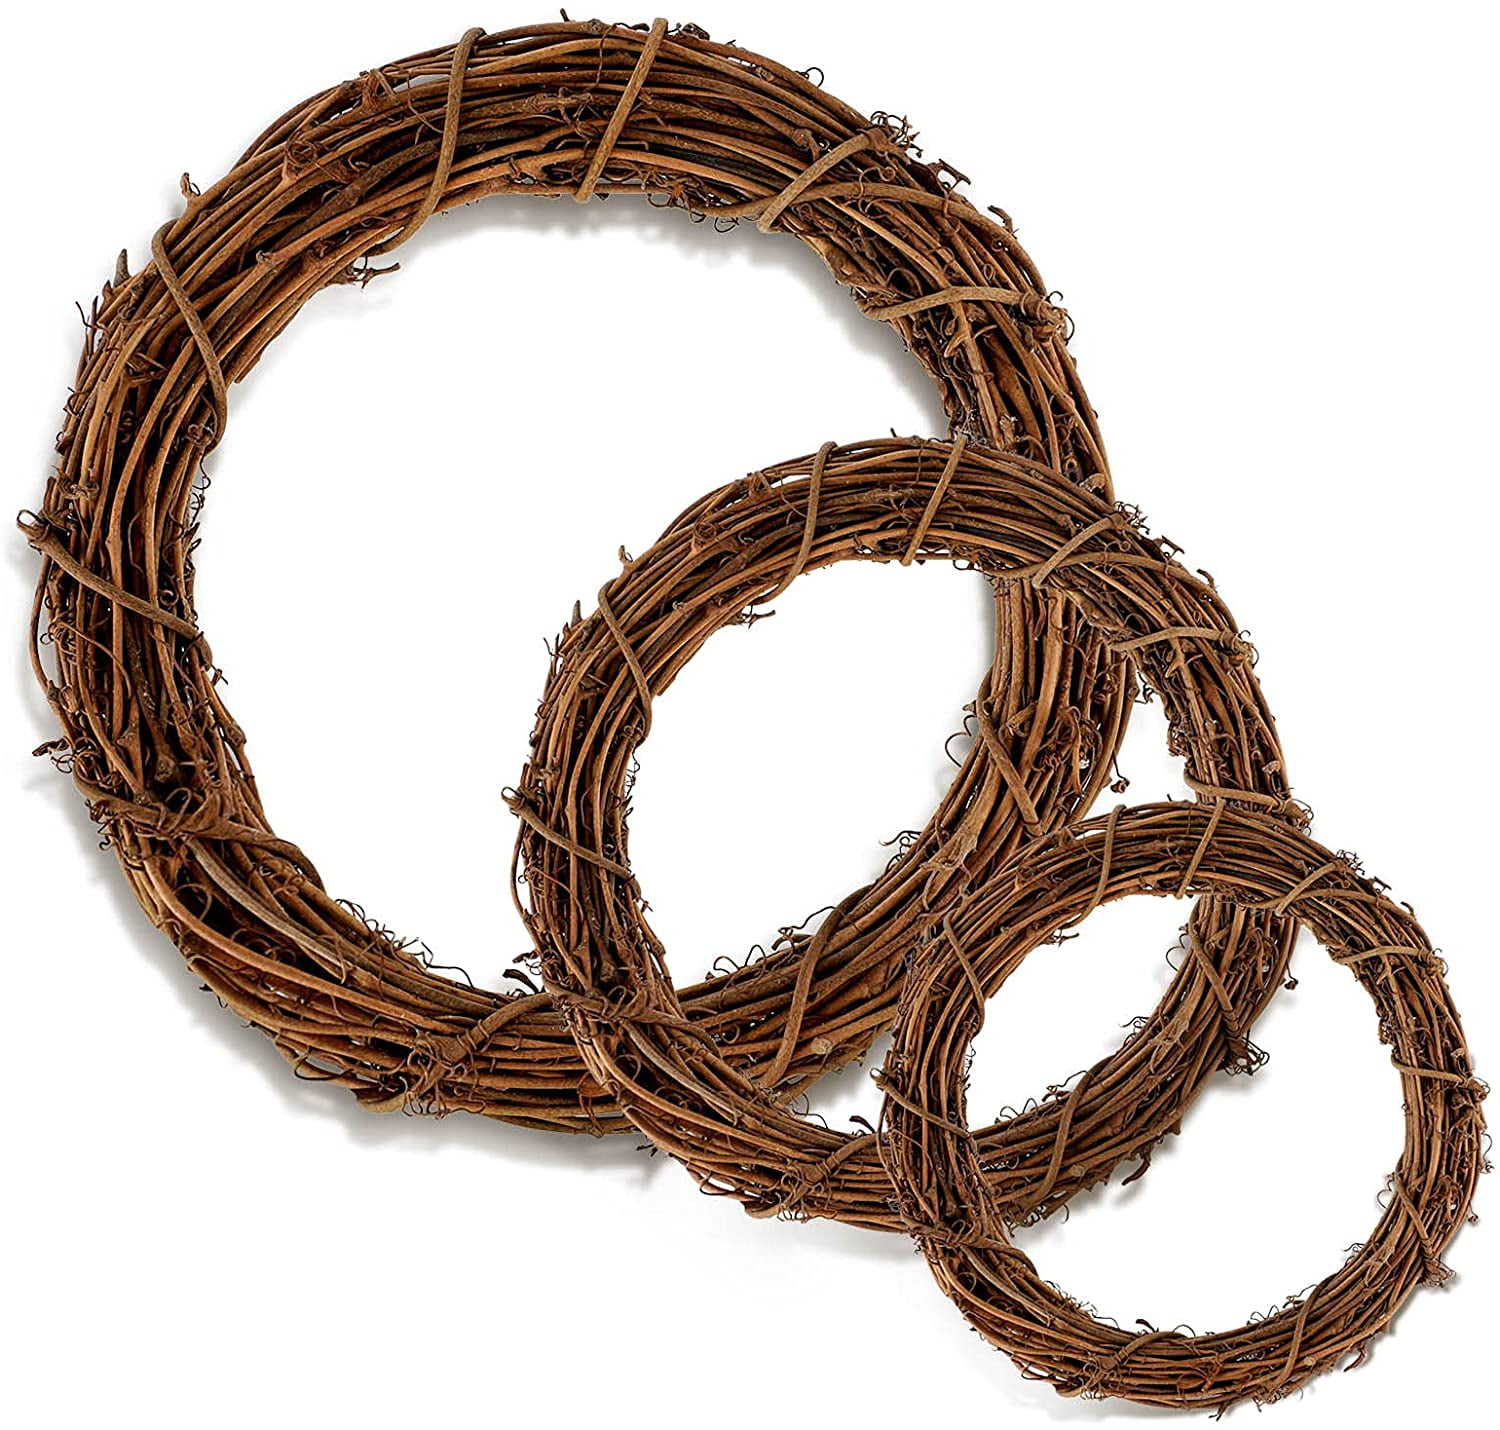 CLISPEED Christmas Twig Garland, 15ft Natural Grapevine Garland Rattan  Hanging Vine Wreath DIY Crafts Christmas Decor Wedding Holiday Home Wall  Party